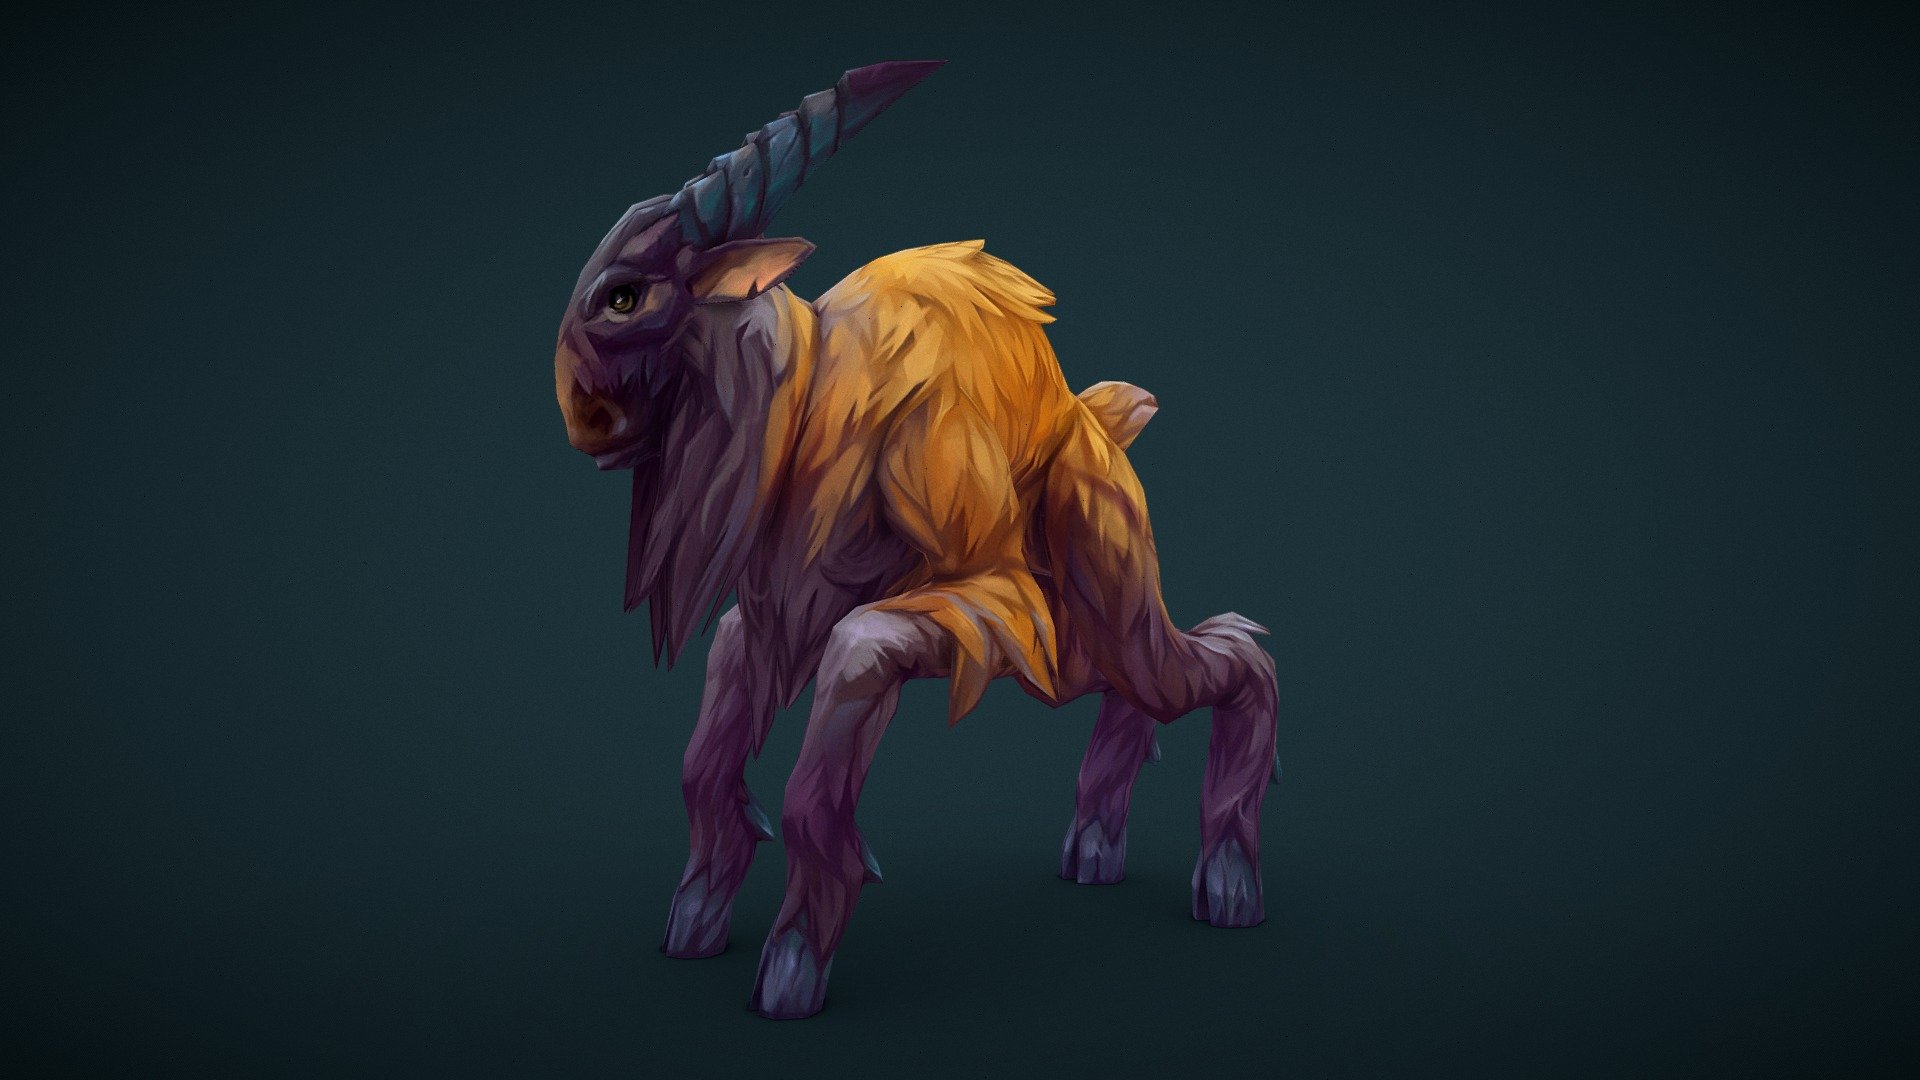 GOAT

Goat - An excellent source of meat, skins and bones :D

Softwares: Maya, Blender and Adobe Photoshop.

Mobile game asset:
Low poly 2k Tris
Texture 1024x1024
Without alpha
HandPainted - Goat - 3D model by Andrey (@fruitmamba) 3d model